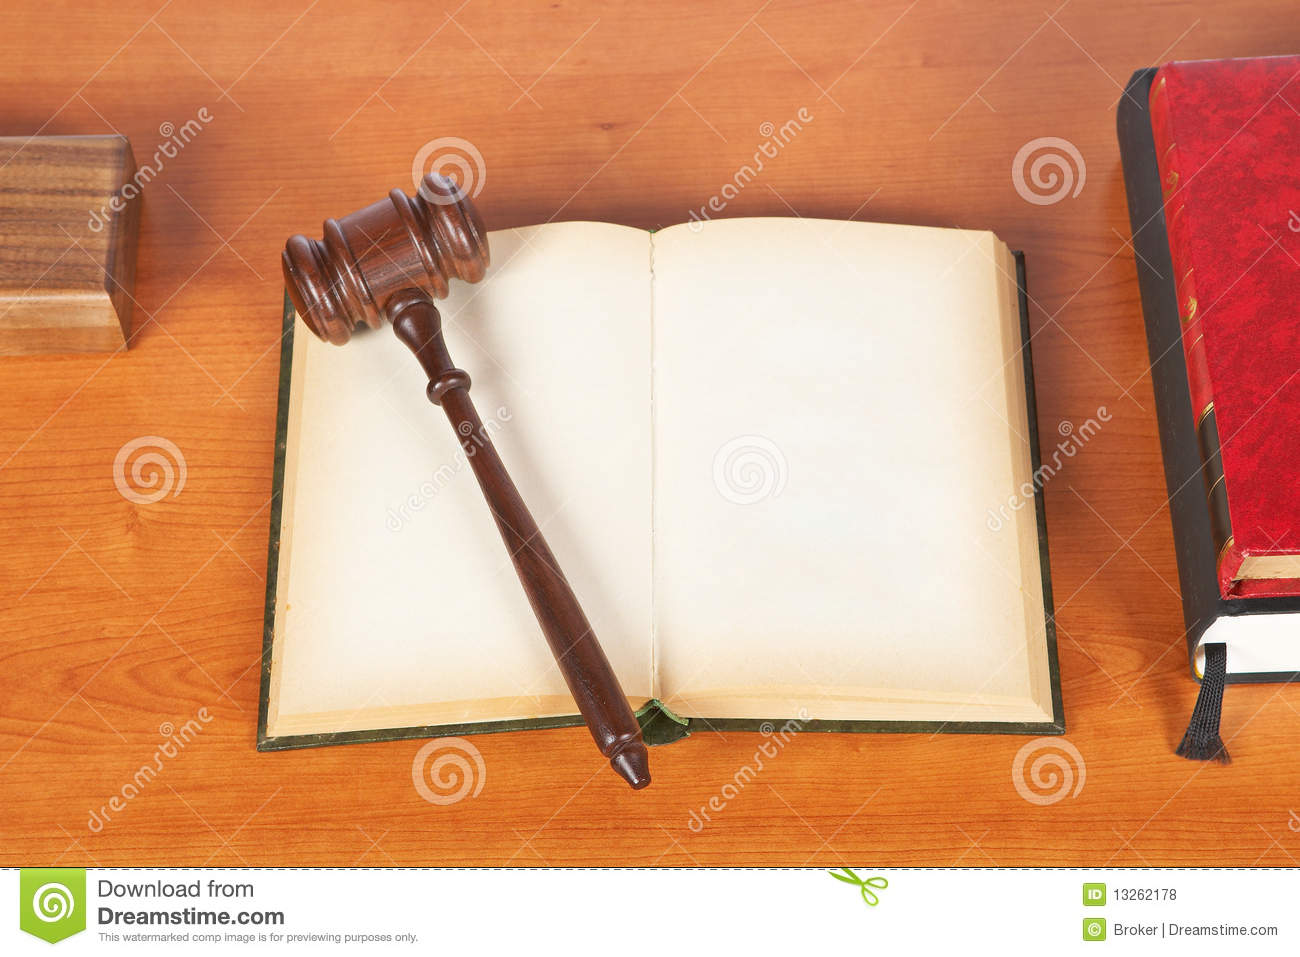 Wooden Gavel From The Court And Opened Law Book On Wooden Background